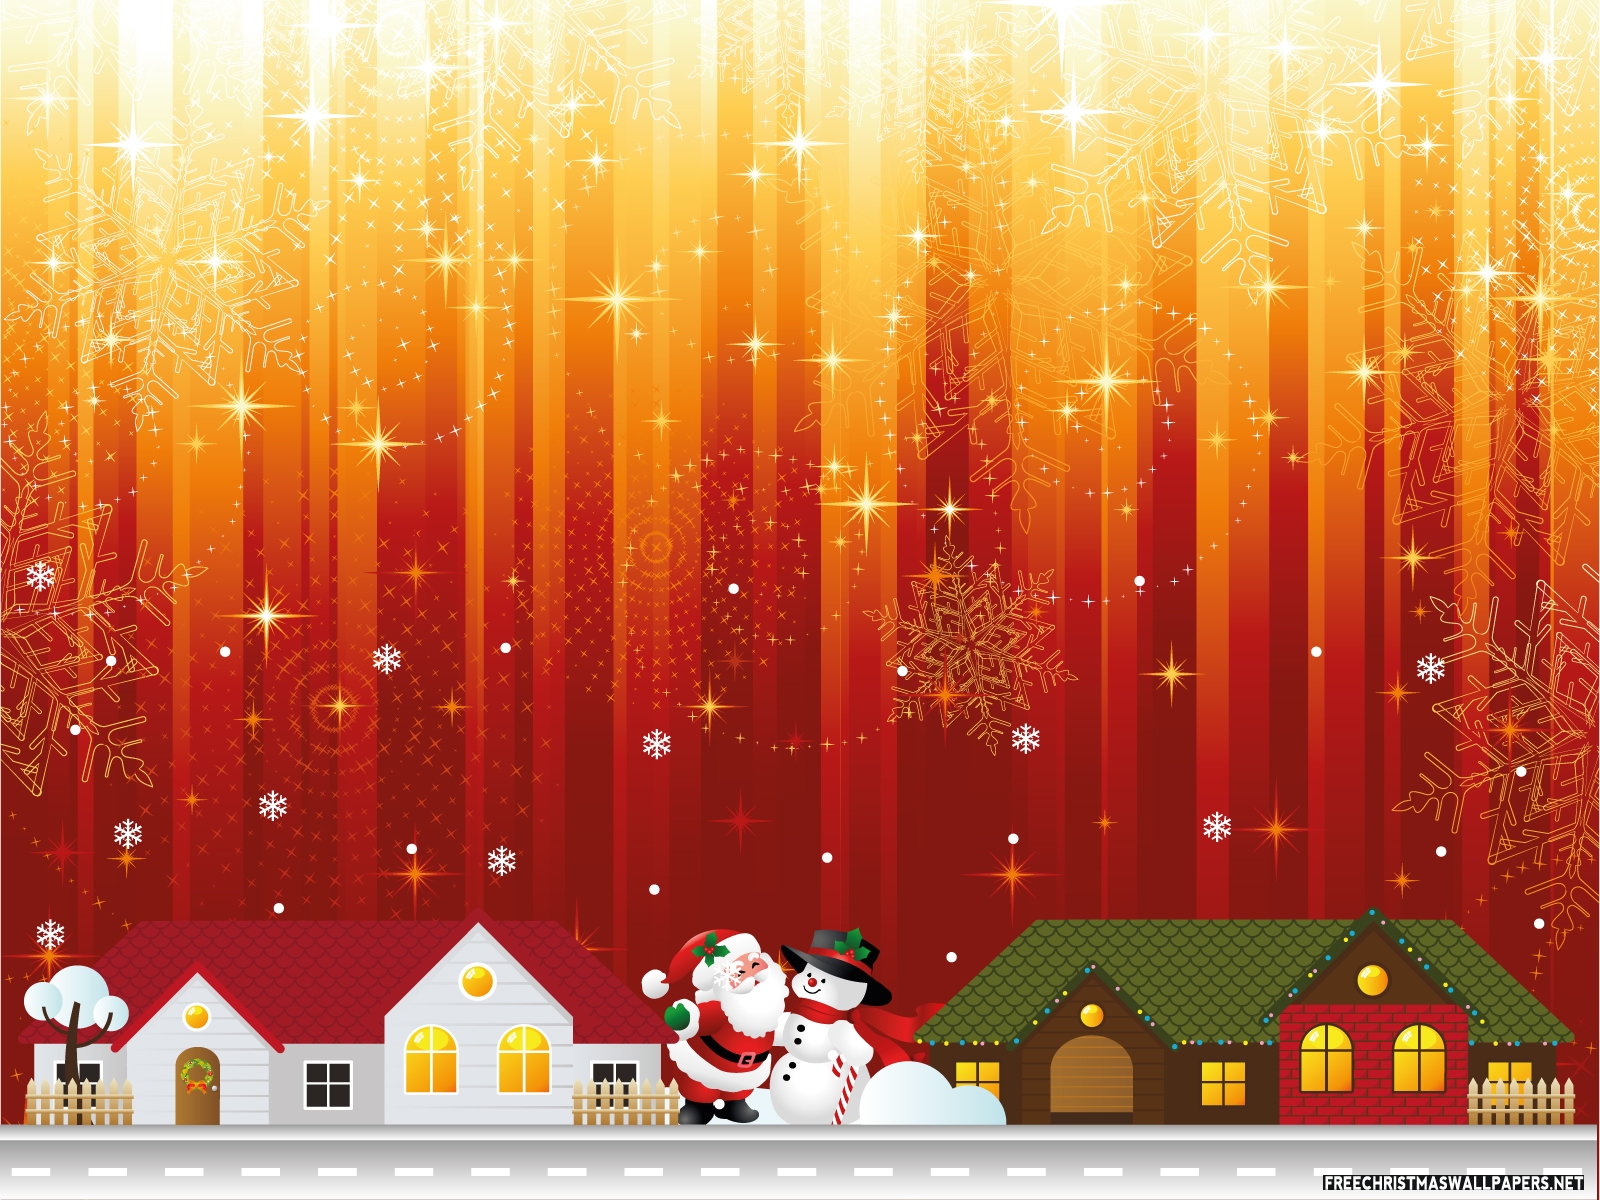 New Free Collection of HD Christmas Wallpaper